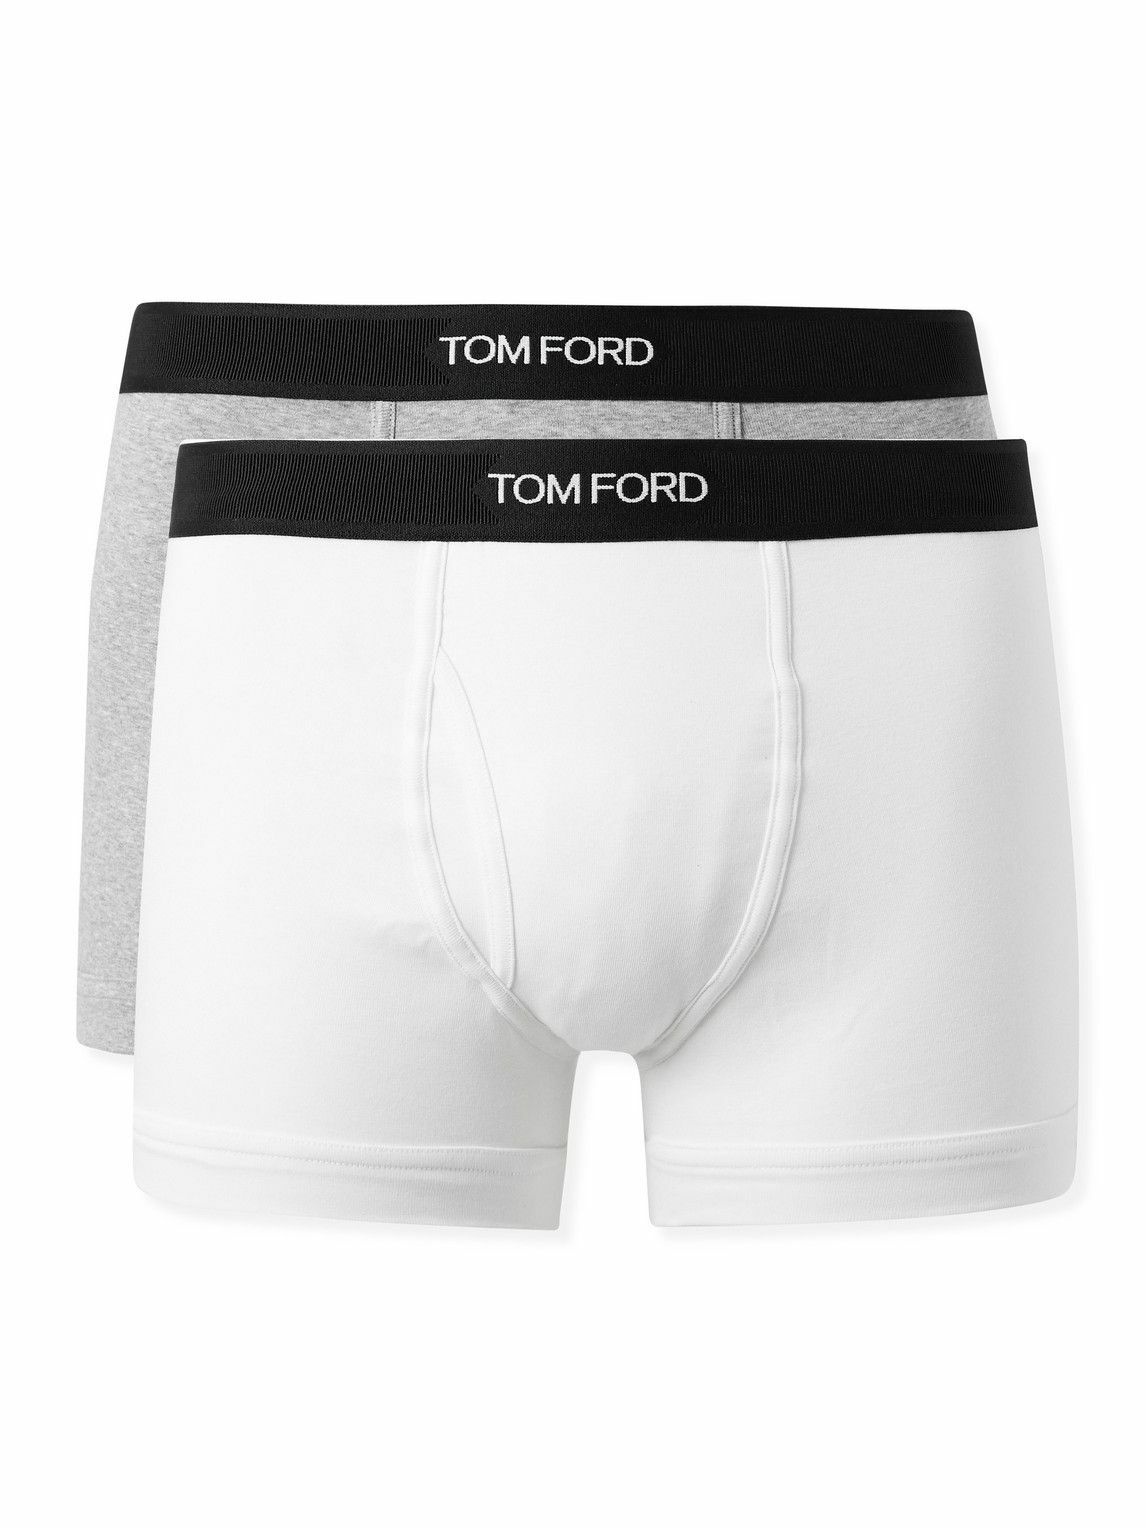 TOM FORD - Two-Pack Stretch-Cotton Jersey Boxer Briefs - White TOM FORD